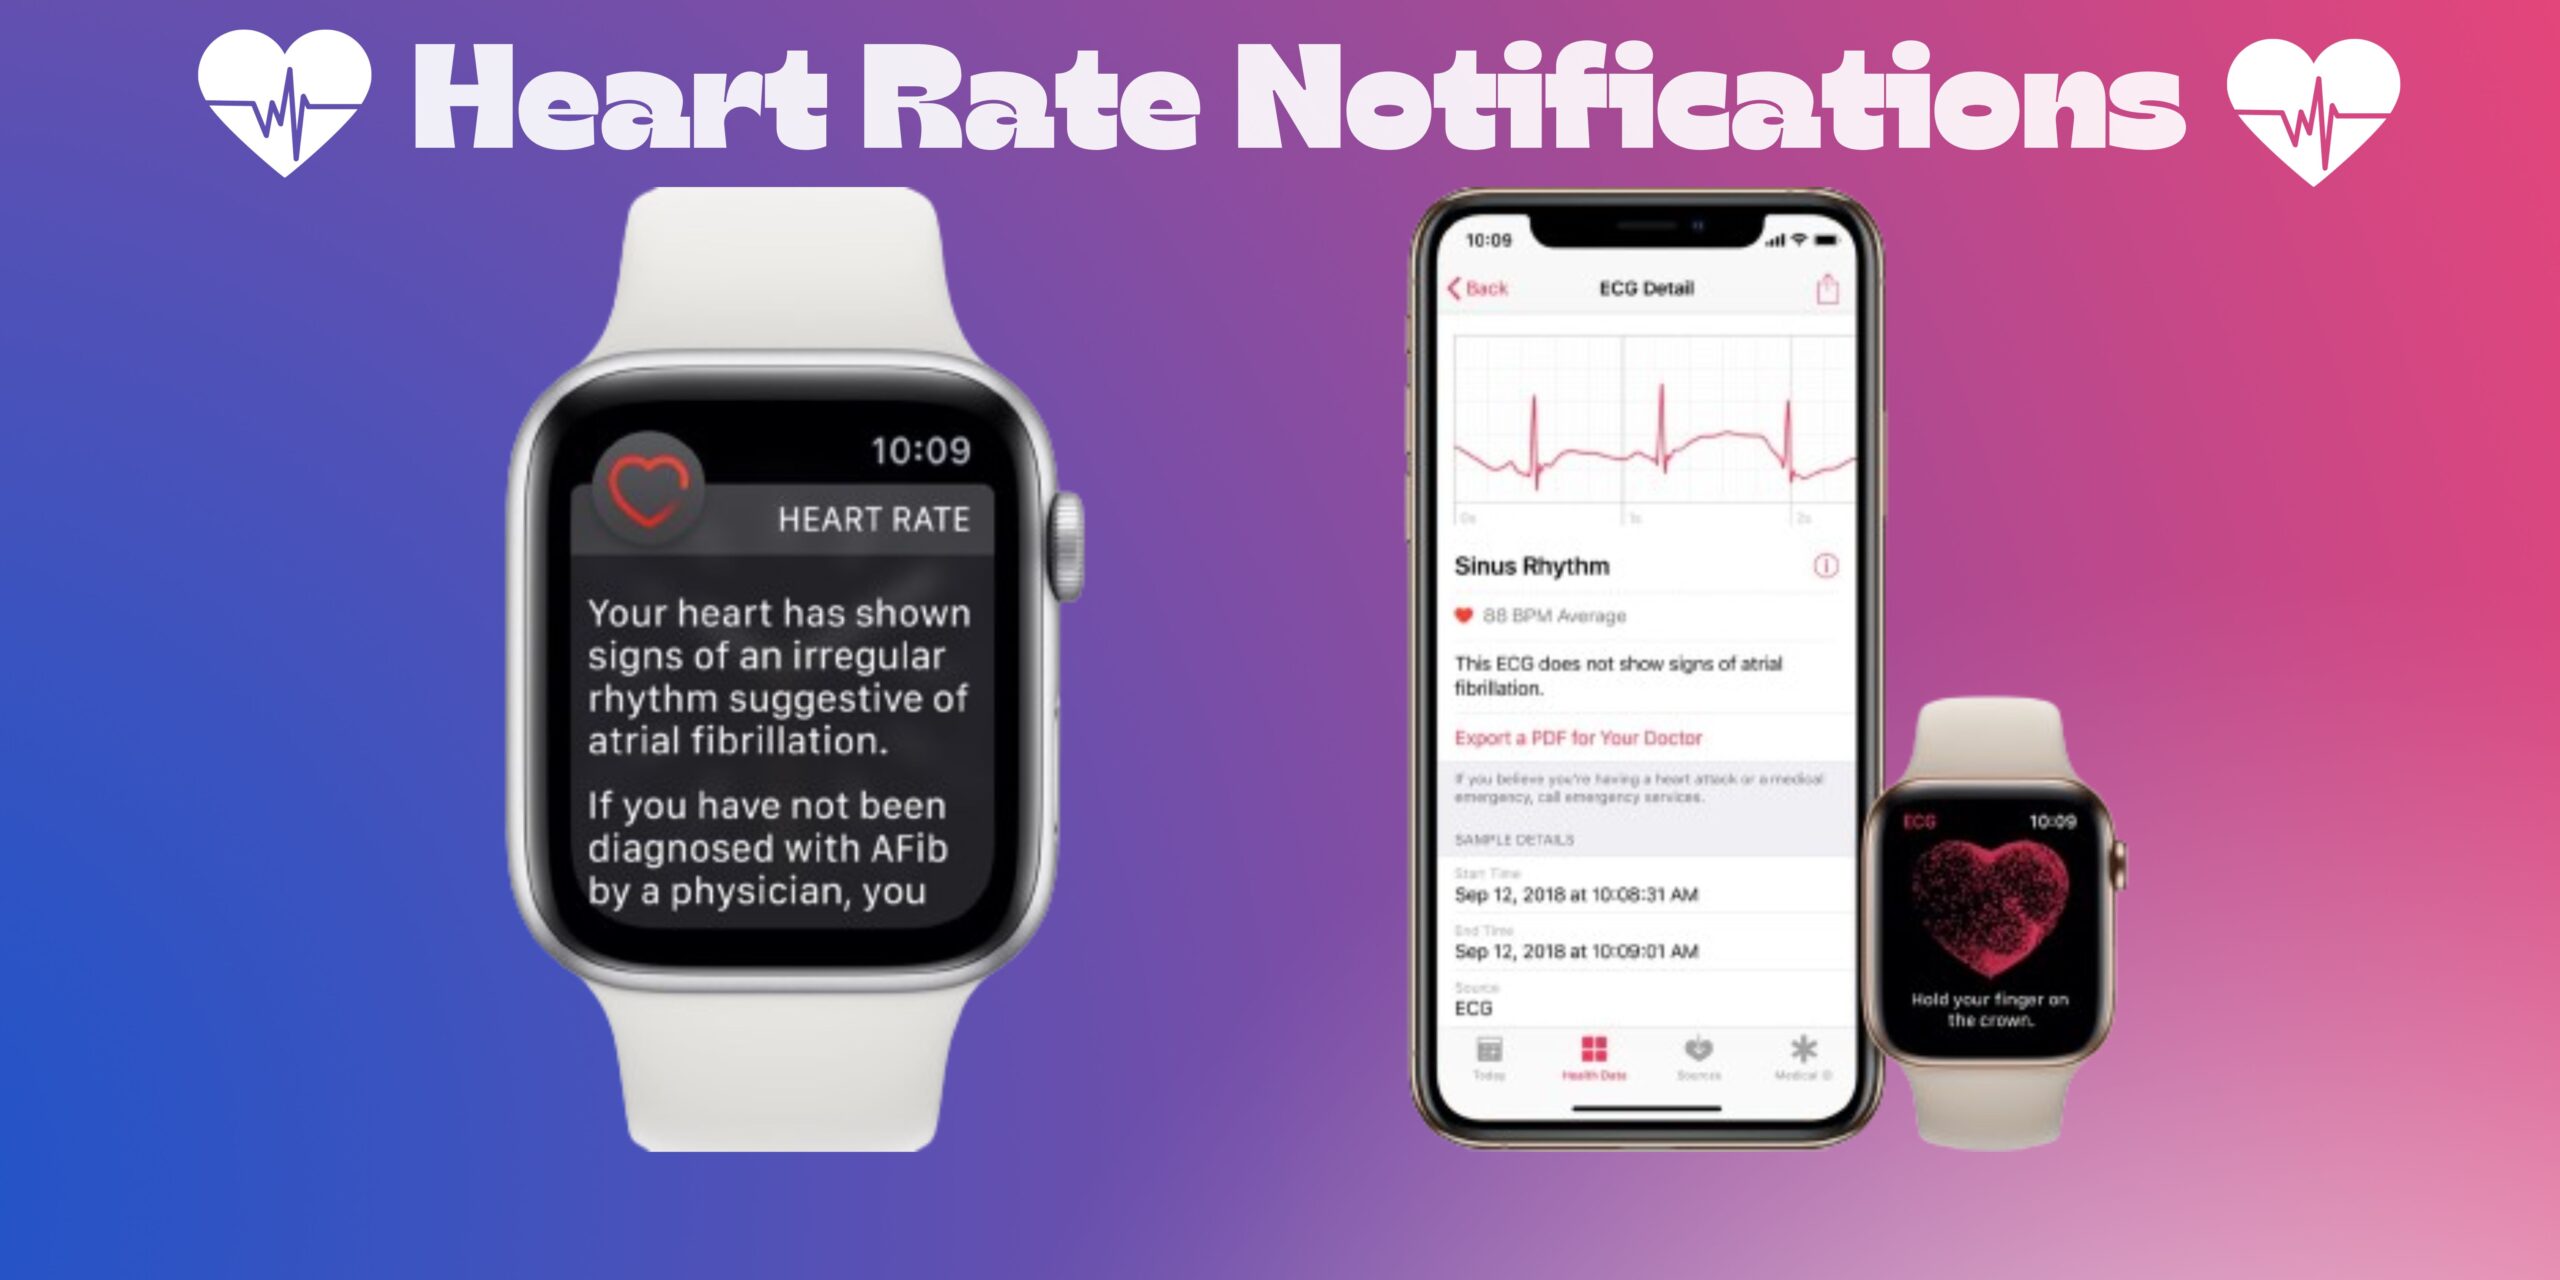 How to set up Heart Rate notifications on Apple Watch